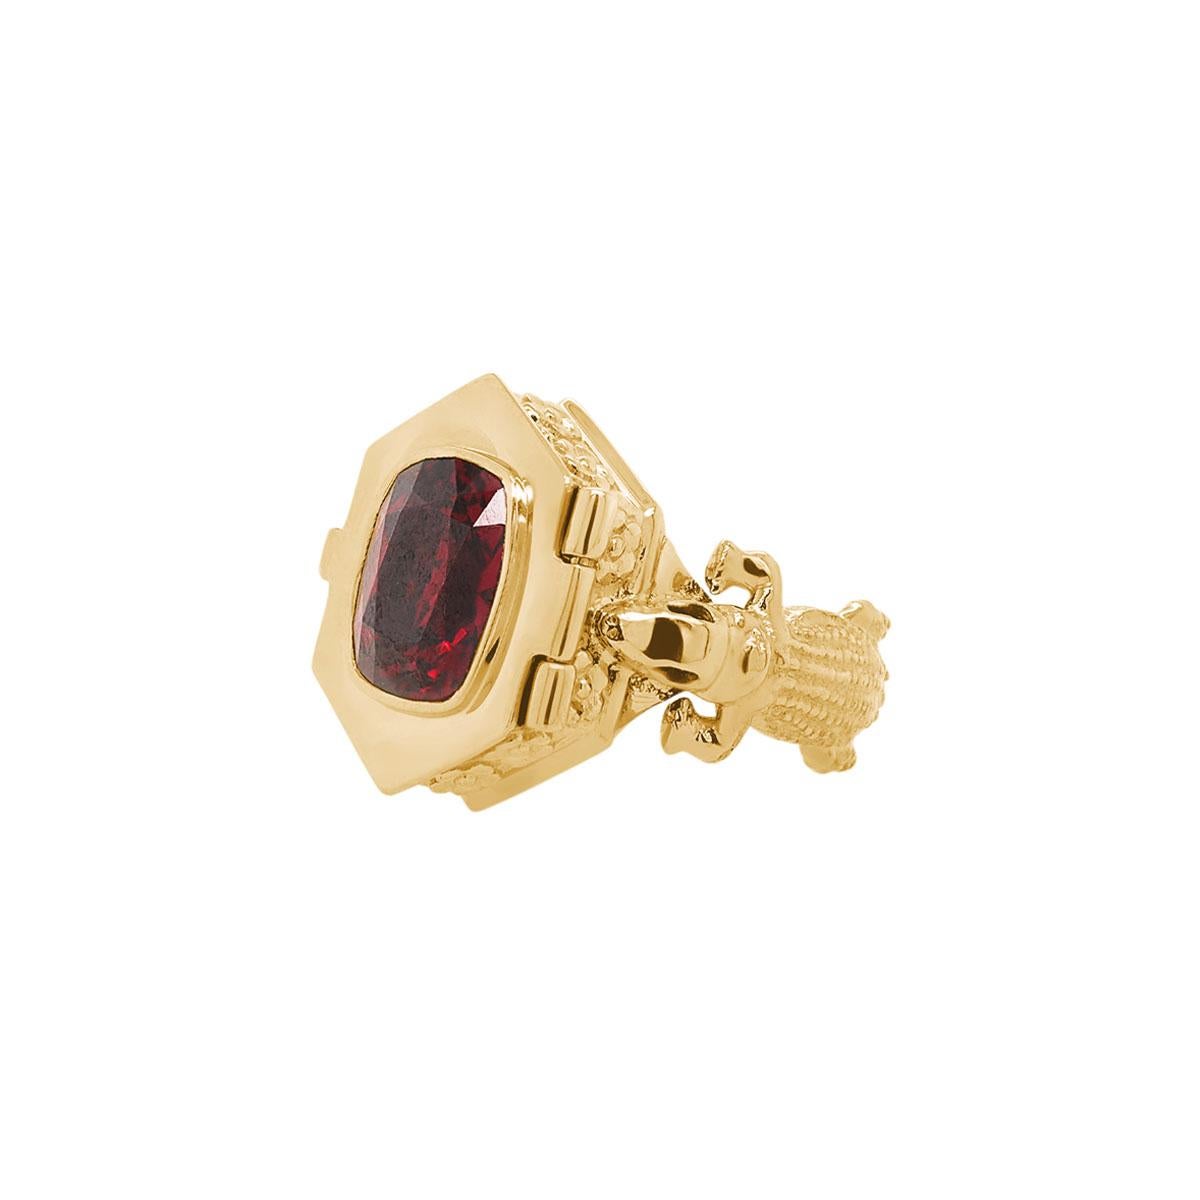 Garnet Funeral Ring 9.8gms Solid 14k Yellow Gold 4.32ctw Garnet In New Condition For Sale In New Orleans, LA